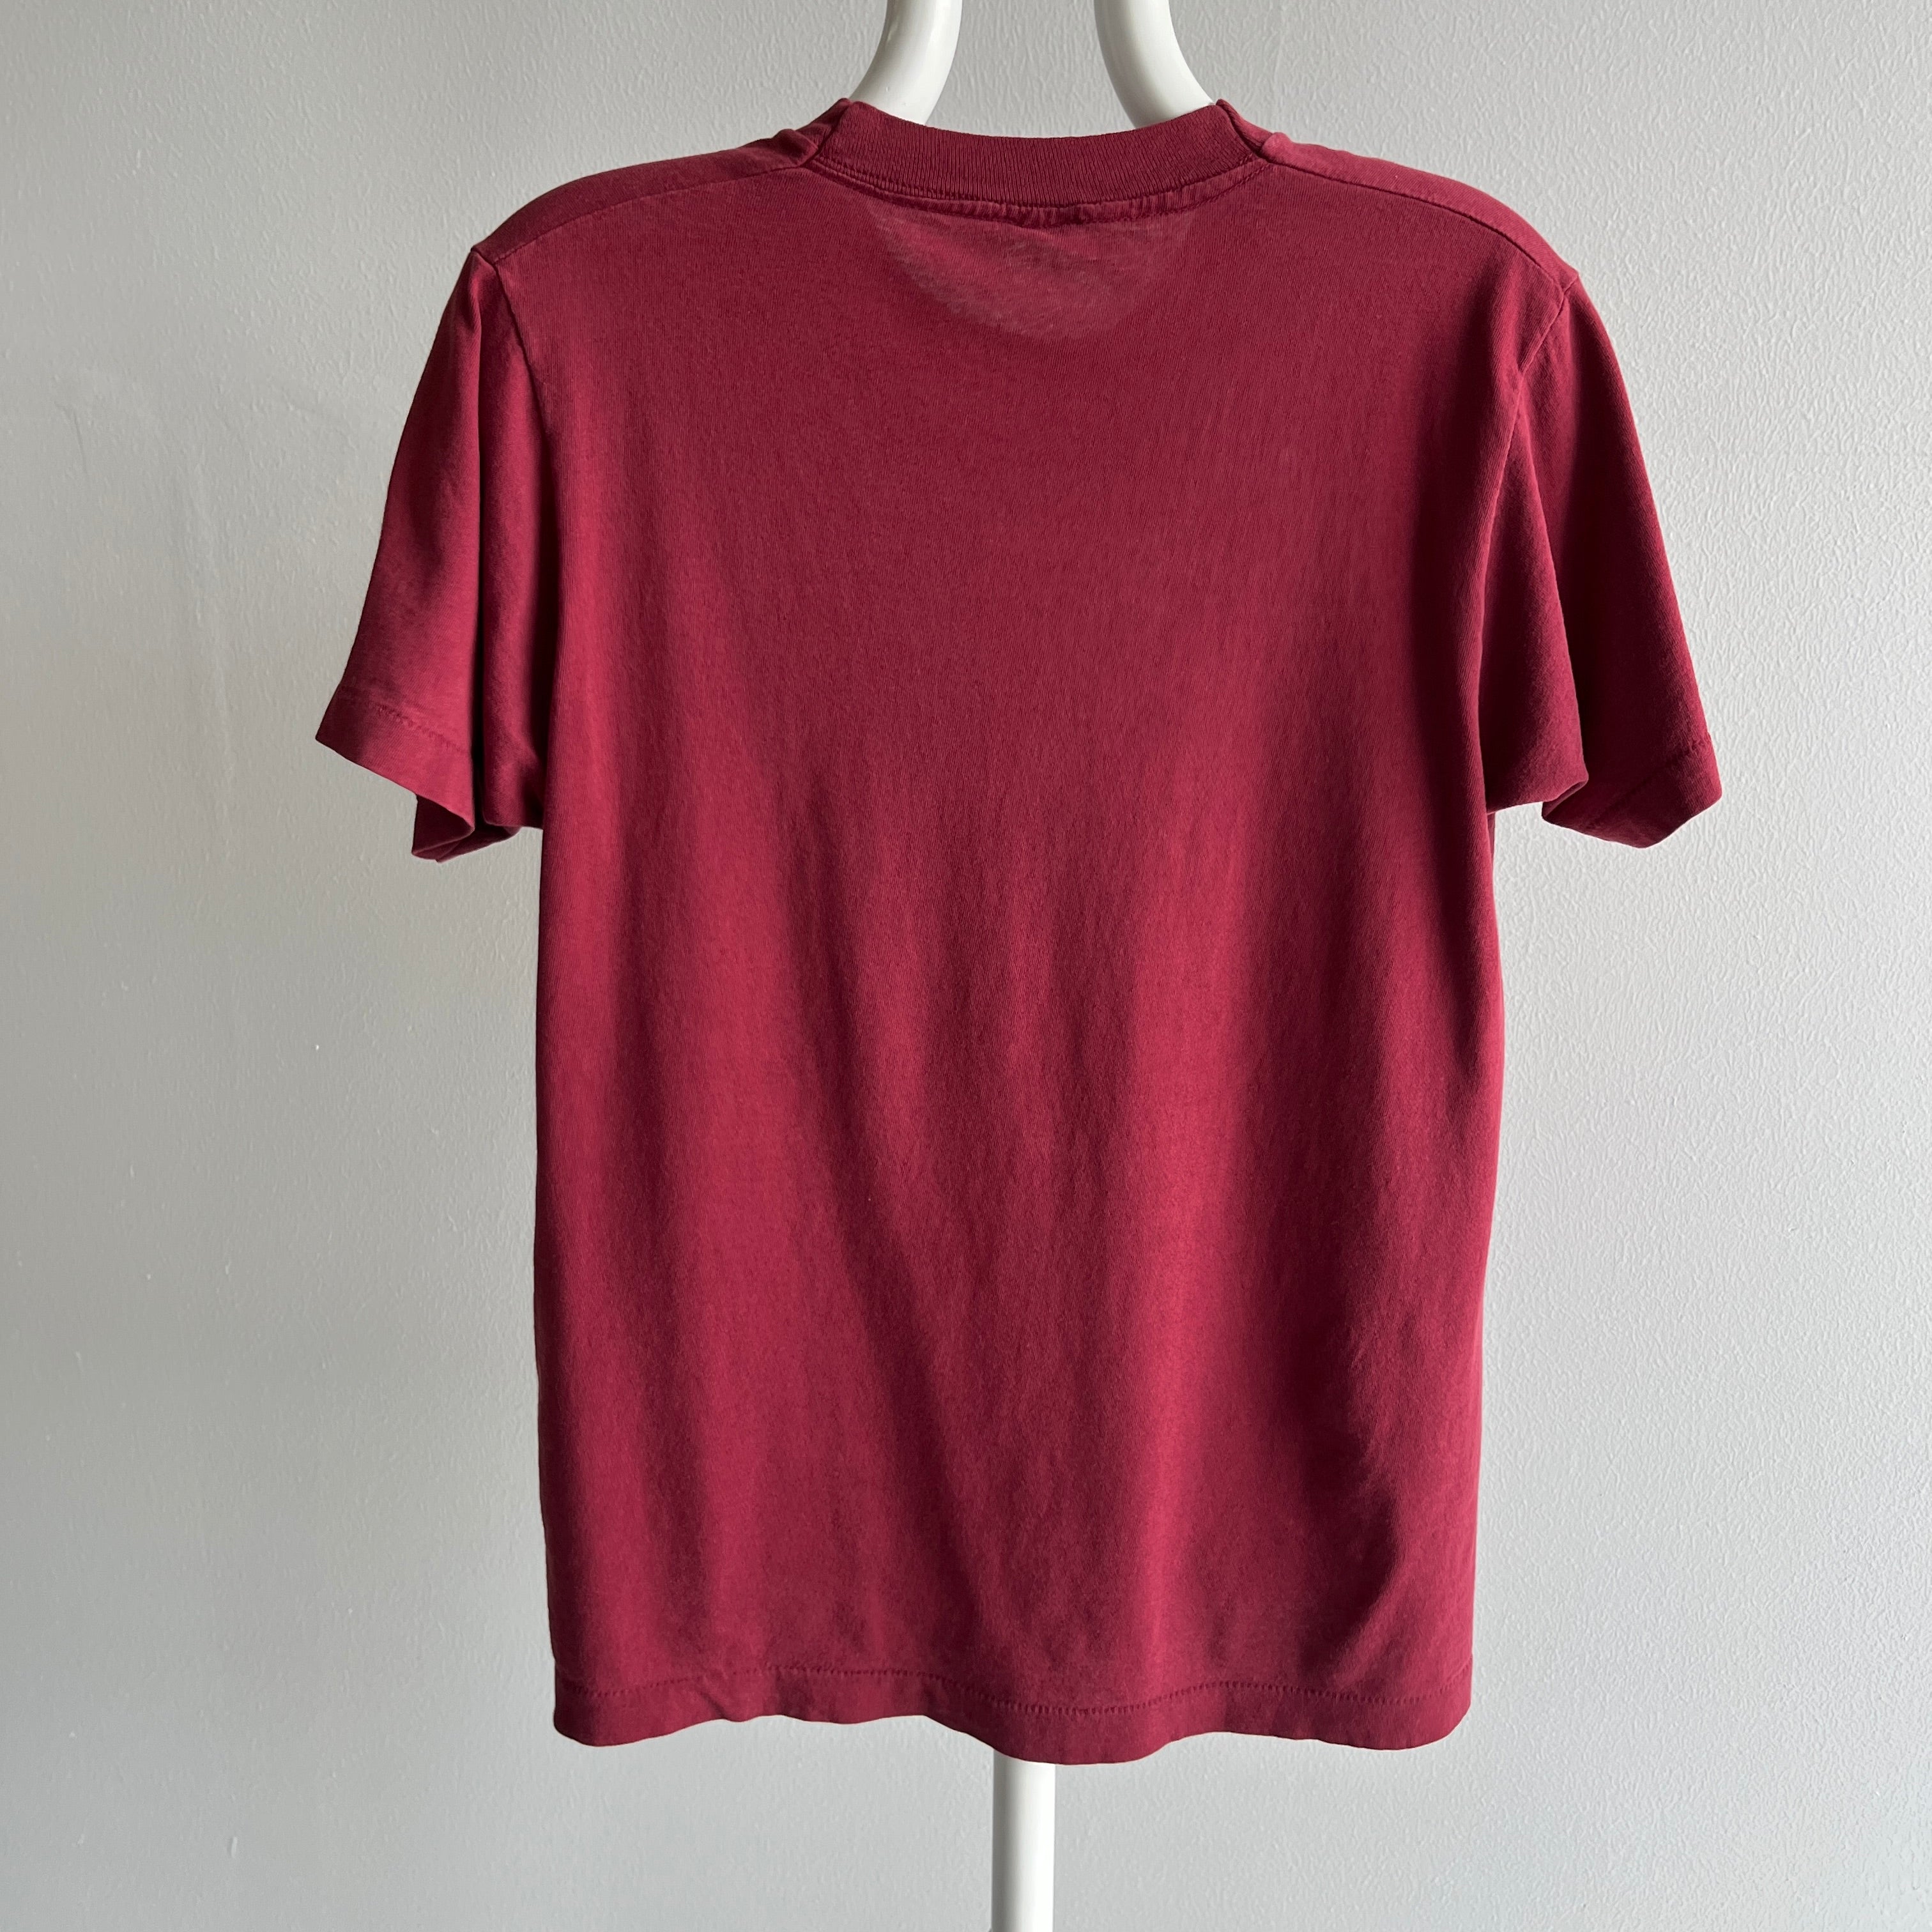 1980s Perfectly Worn, Tattered, Thinned Out and Slouchy Selvedge Pocket Burgundy Red FOTL Pocket T-Shirt